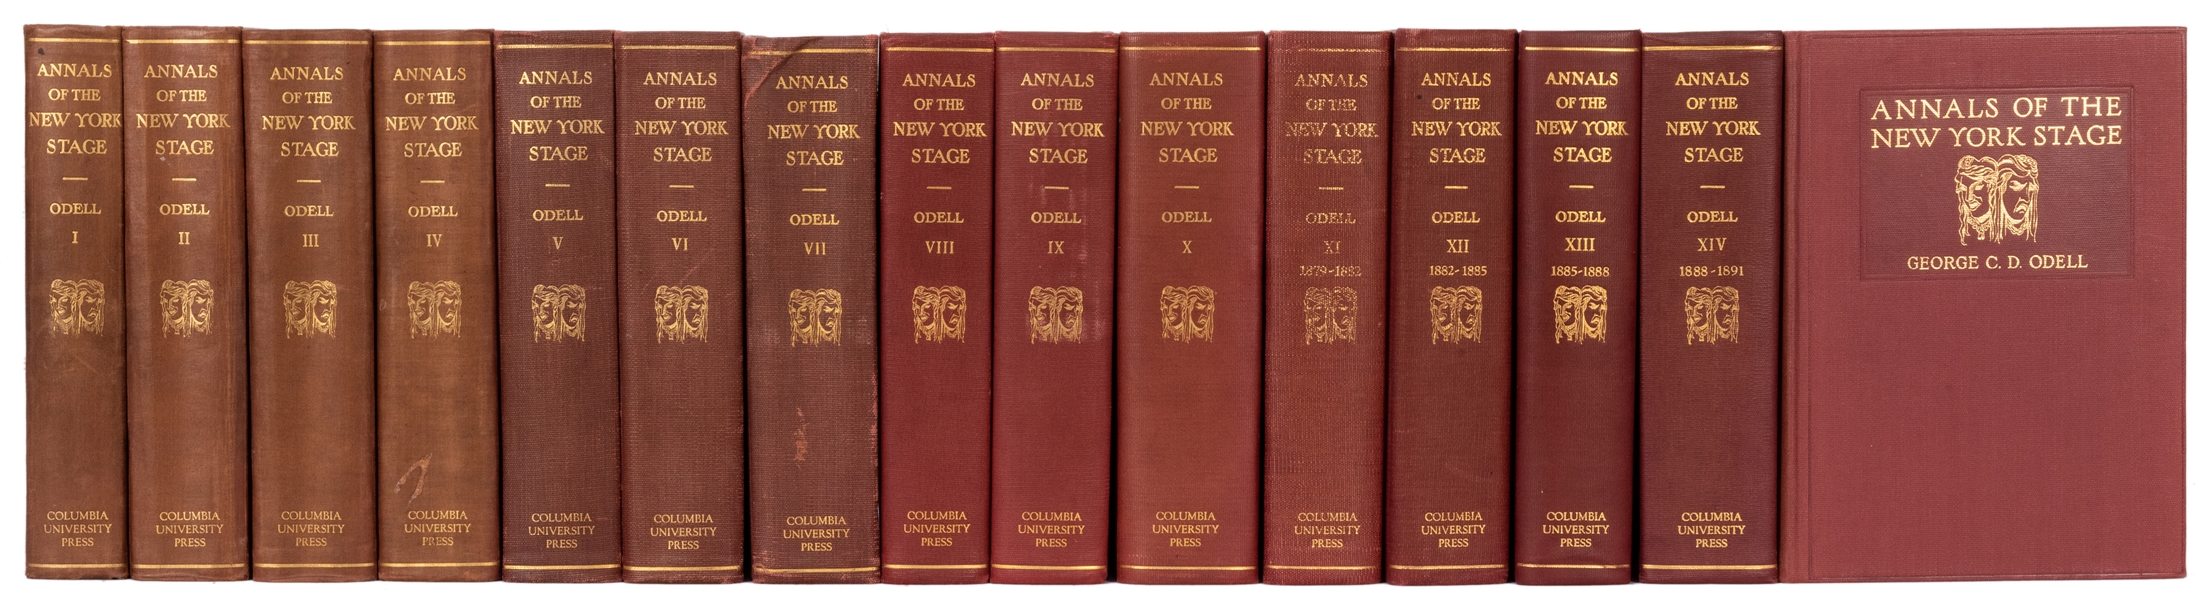 Annals of the New York Stage.